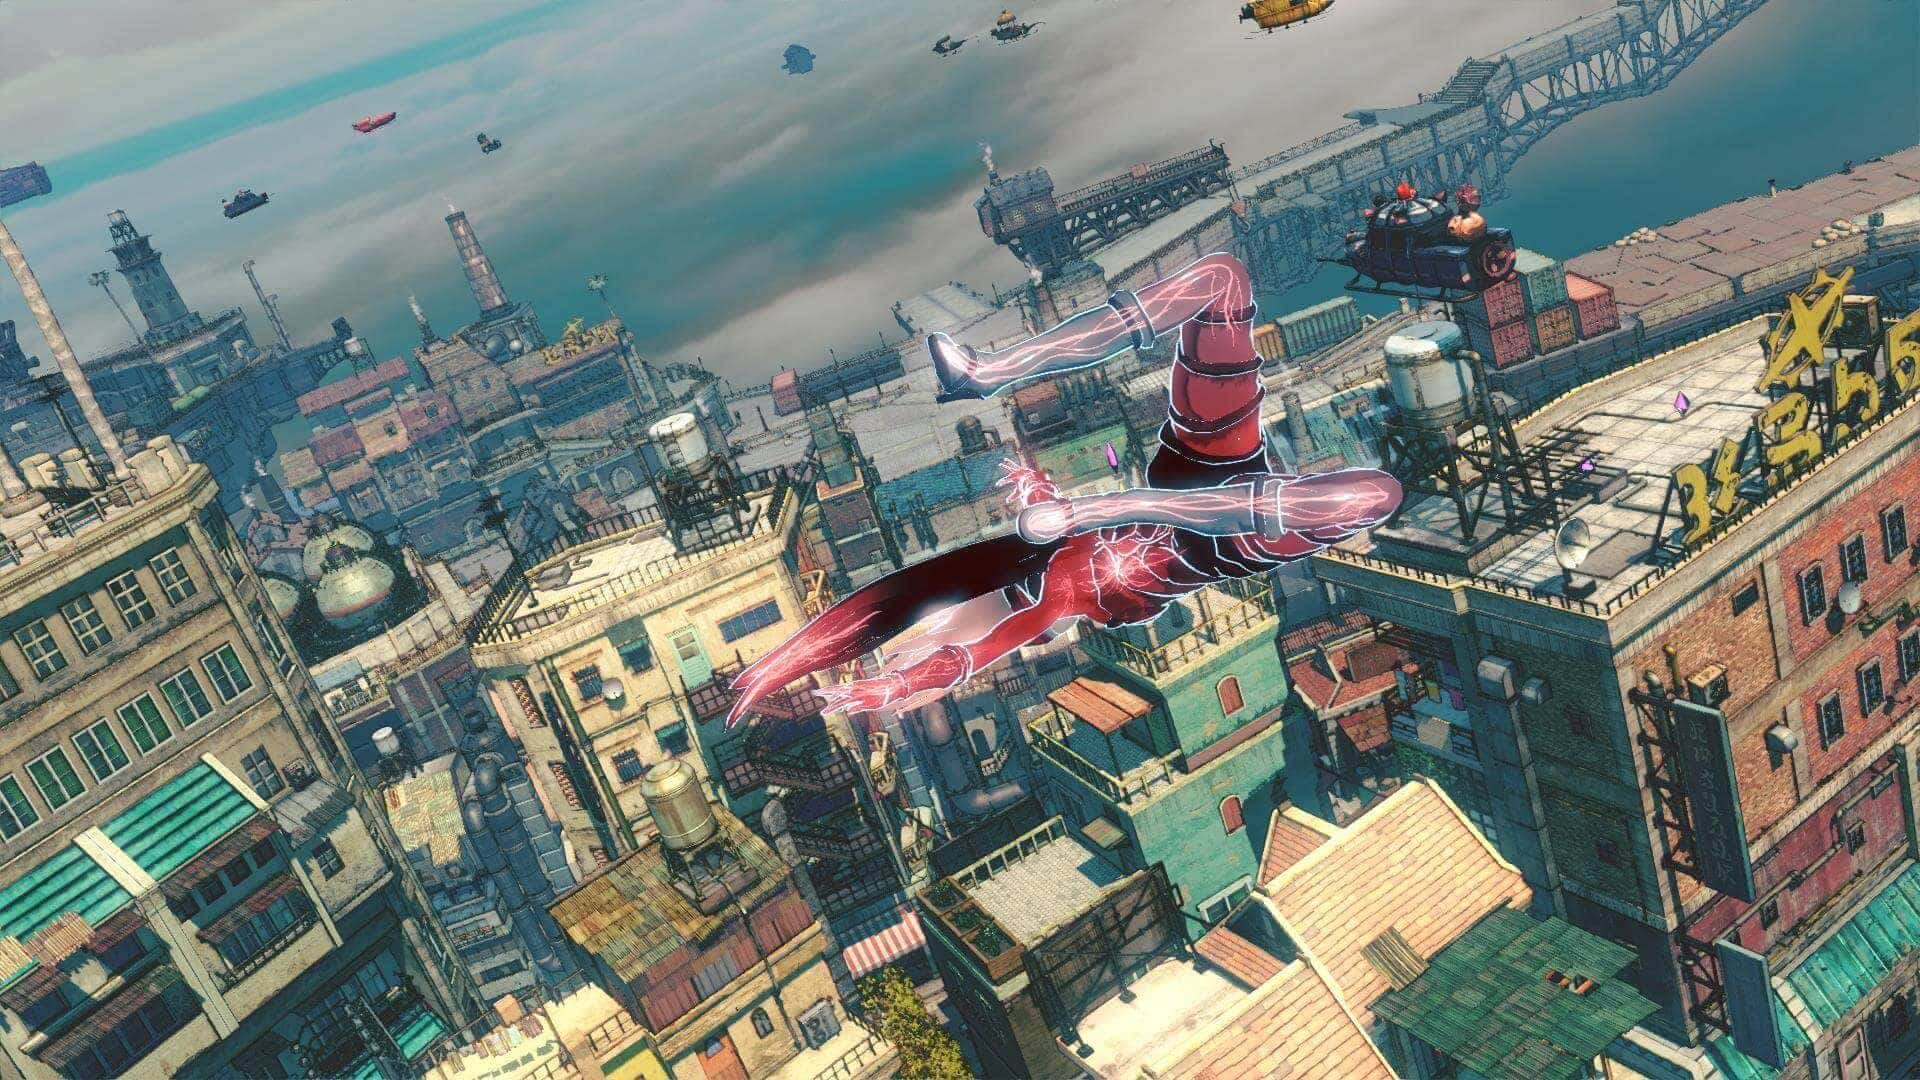 Seven years ago, we got to witness the creatively disorienting and beautiful world of Gravity Rush 2